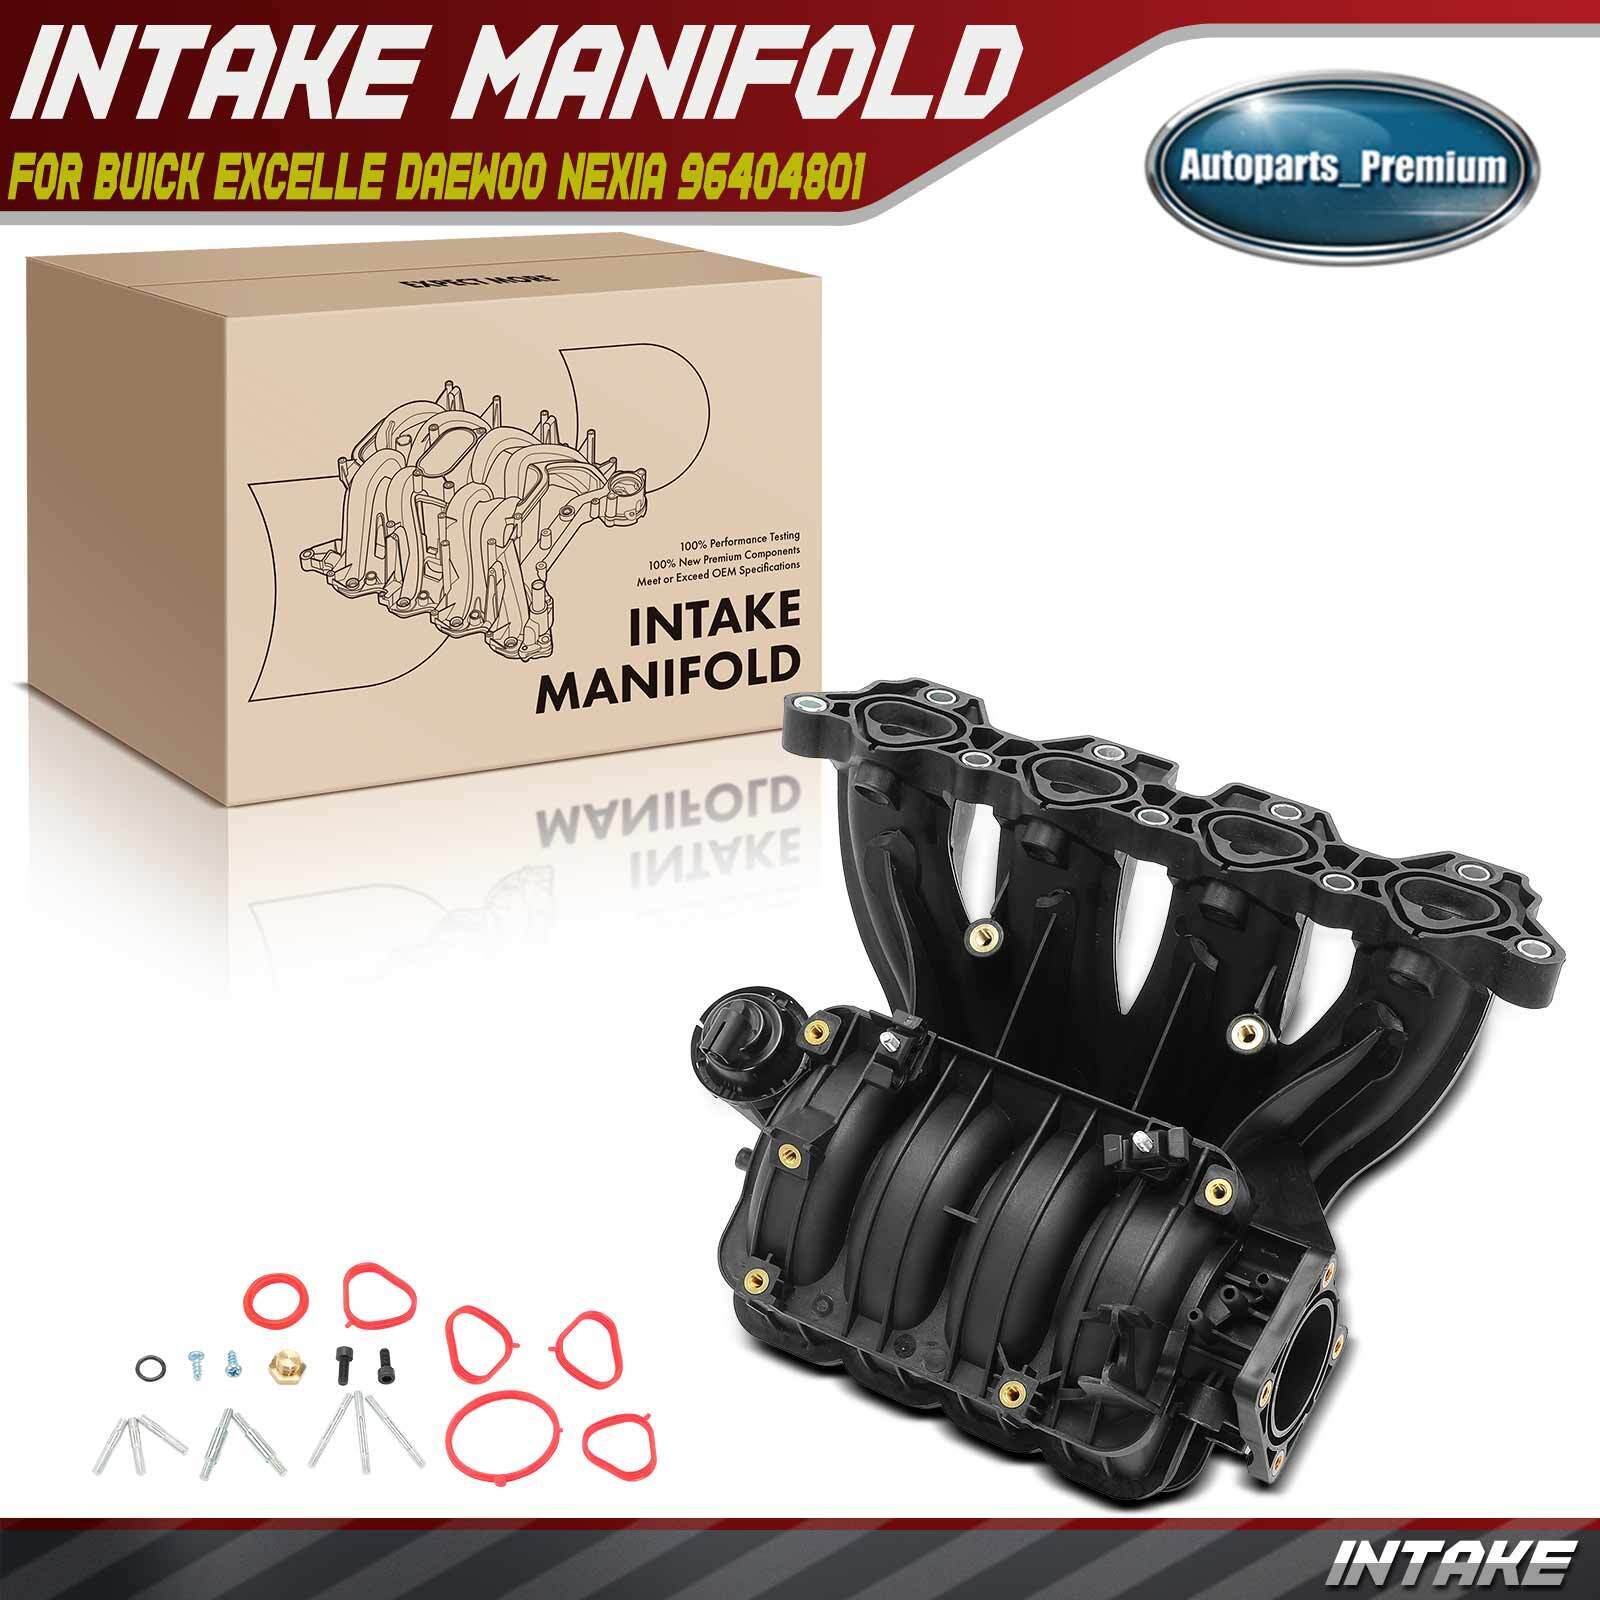 Engine Inlet Intake Manifold Assembly for Buick Excelle Daewoo Nexia 96404801